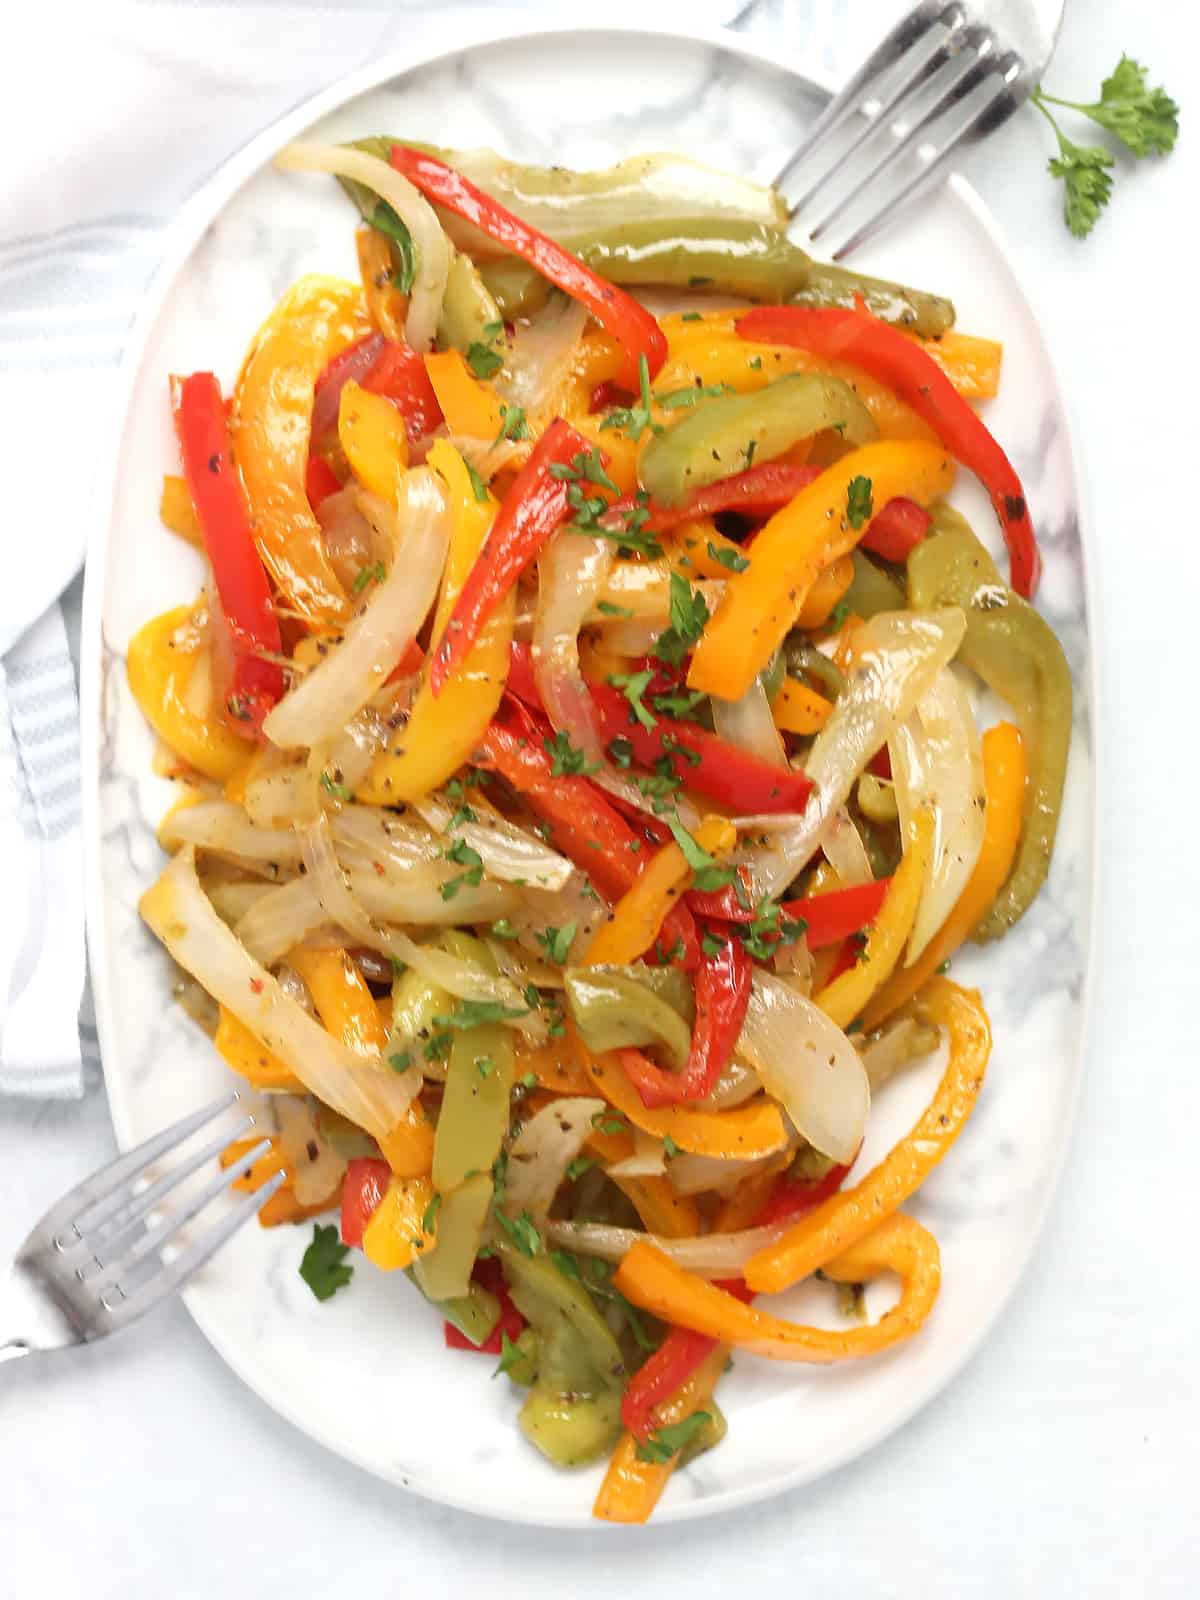 Overhead shot of sautéed peppers and onions on a plate with two forks.